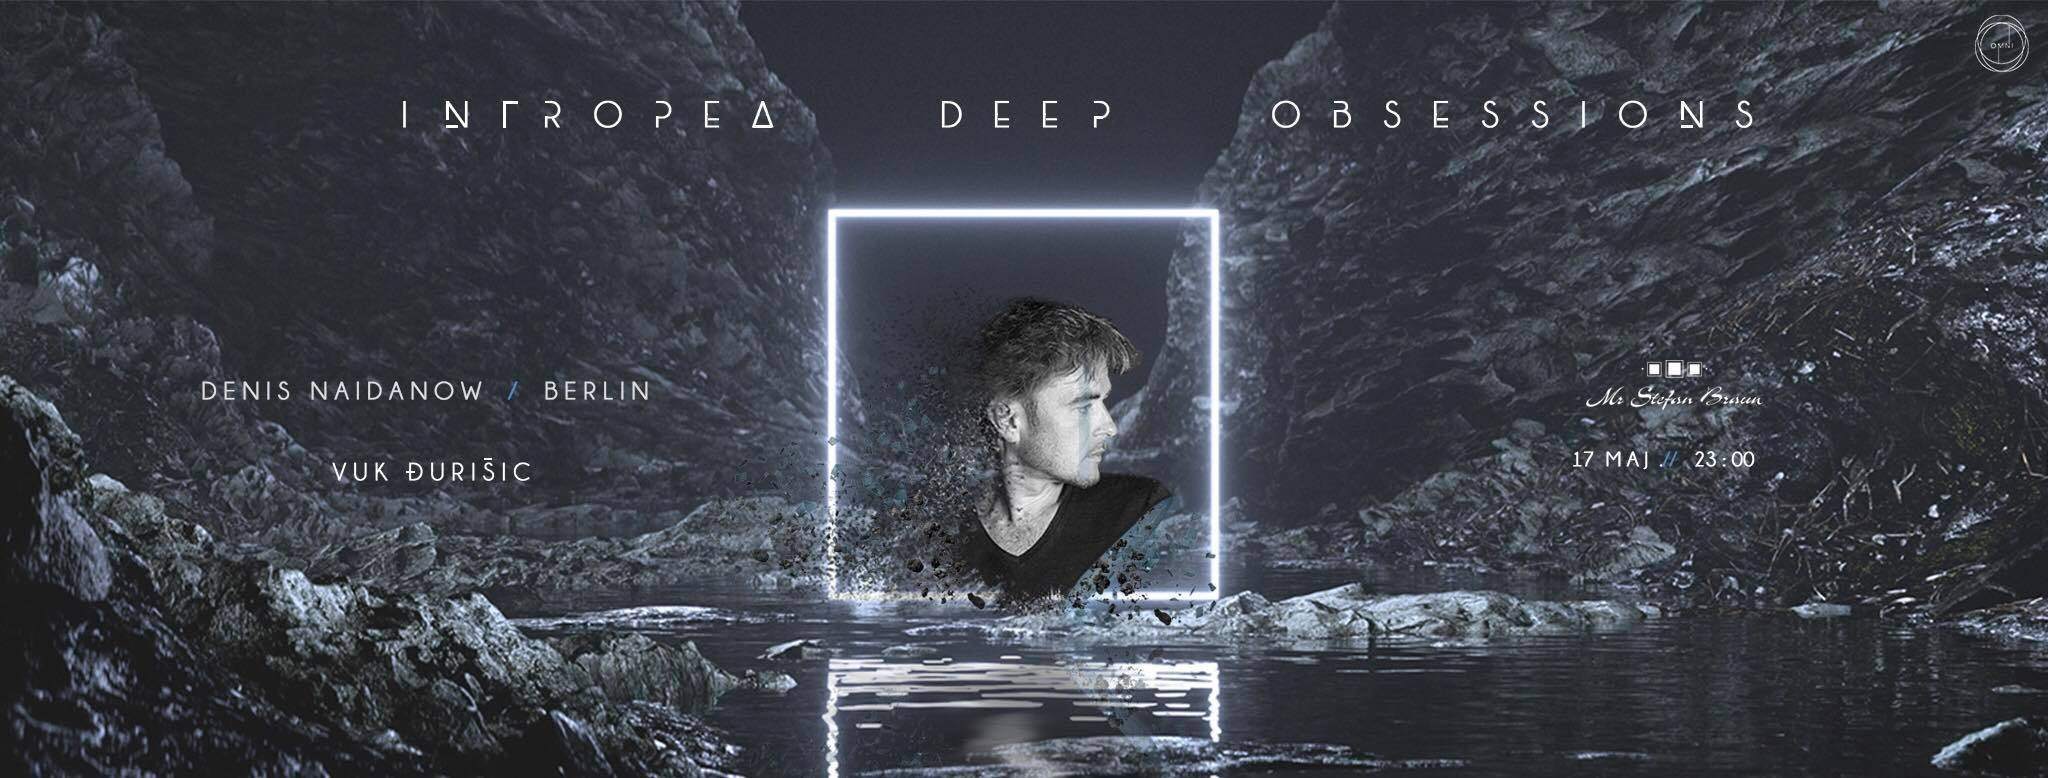 Intropea Deep Obsessions - フライヤー表